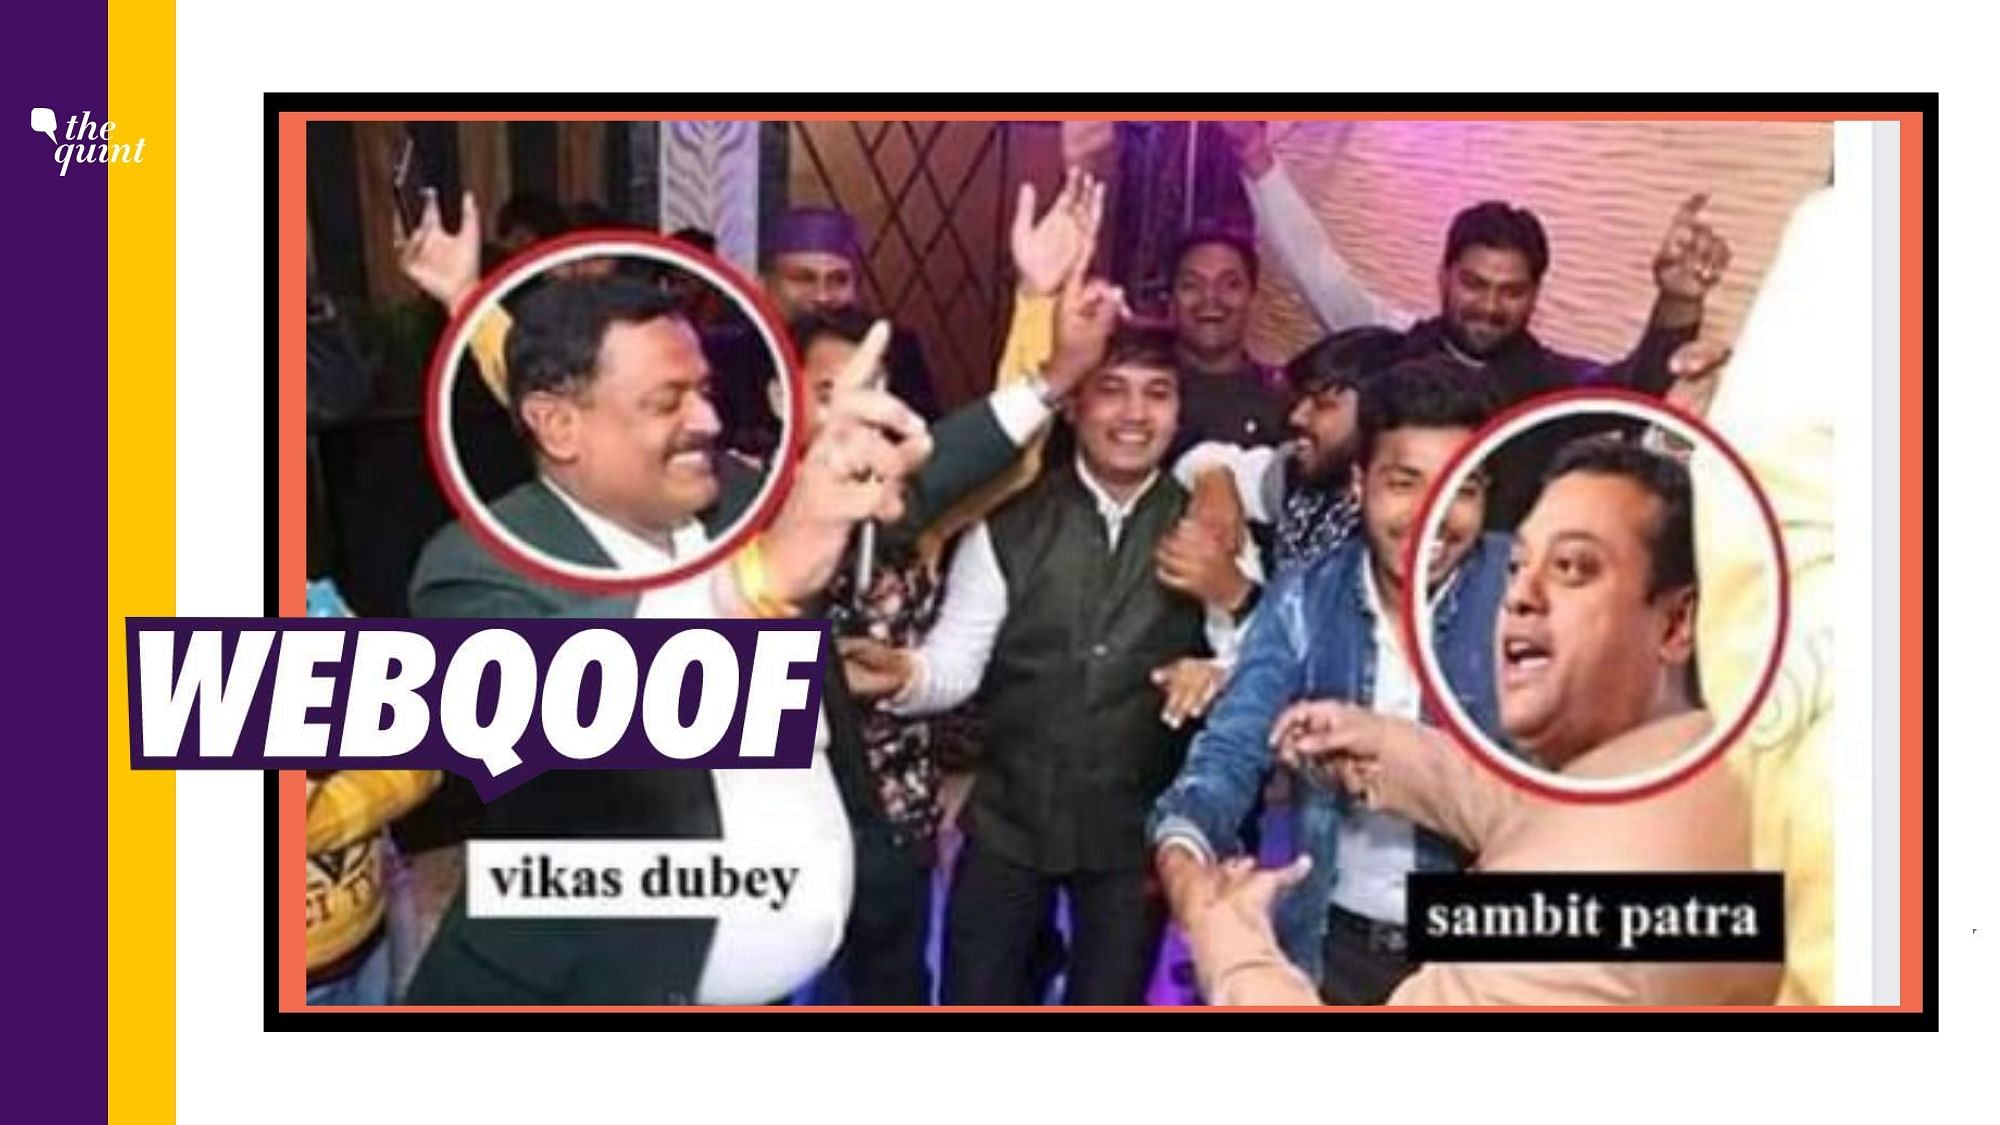 A viral image of BJP spokesperson Sambit Patra dancing at a function with <a href="https://www.thequint.com/big-story/up-gangster-vikas-dubey-dead">history-sheeter Vikas Dubey</a> is doing rounds on social media.